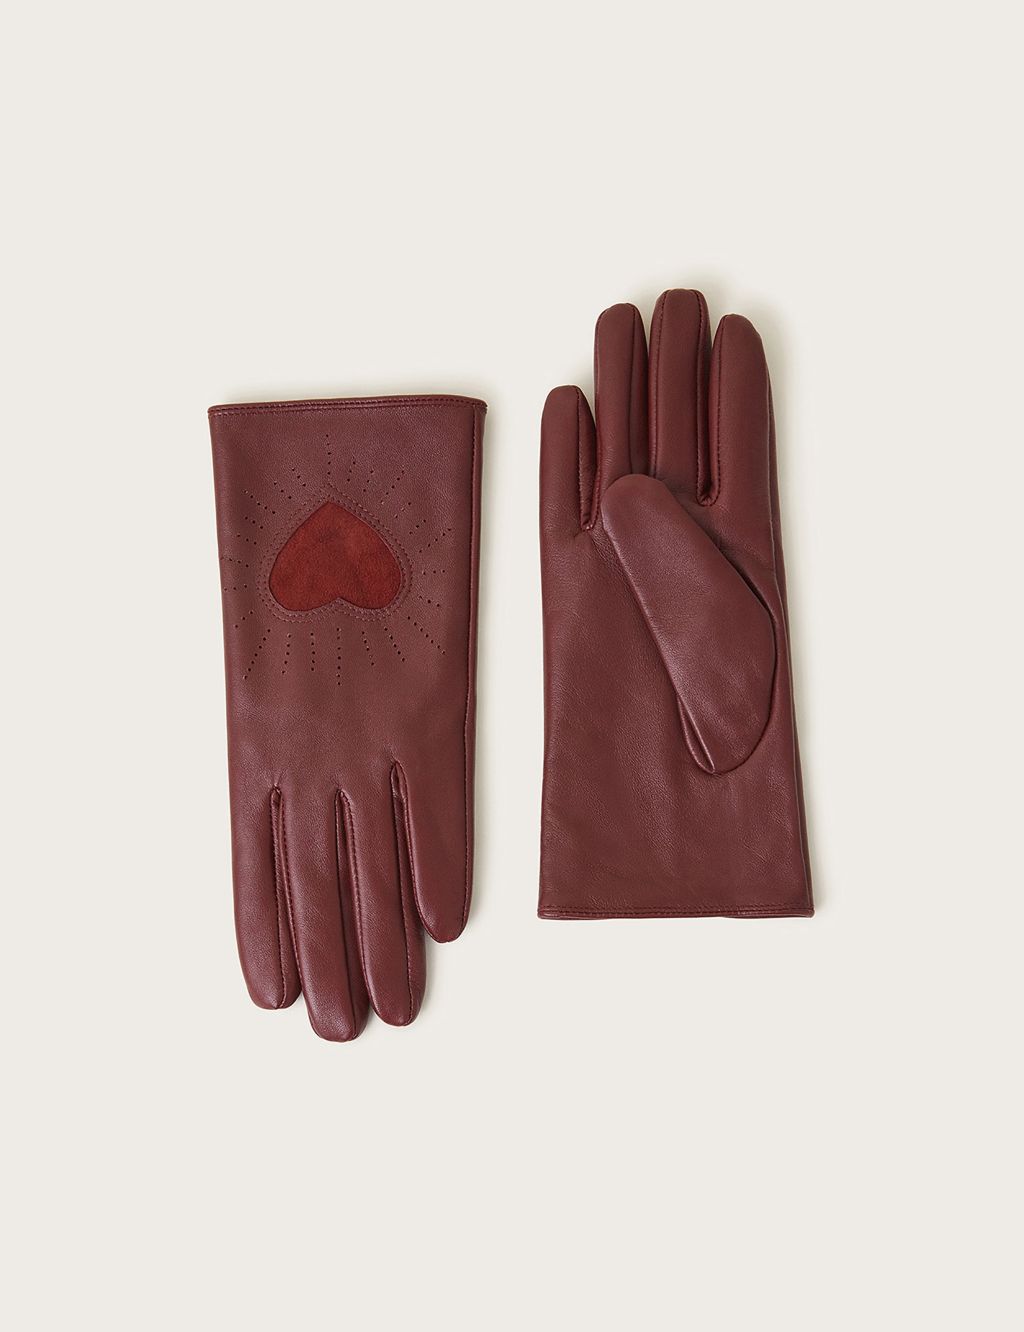 Leather Heart Gloves image 1